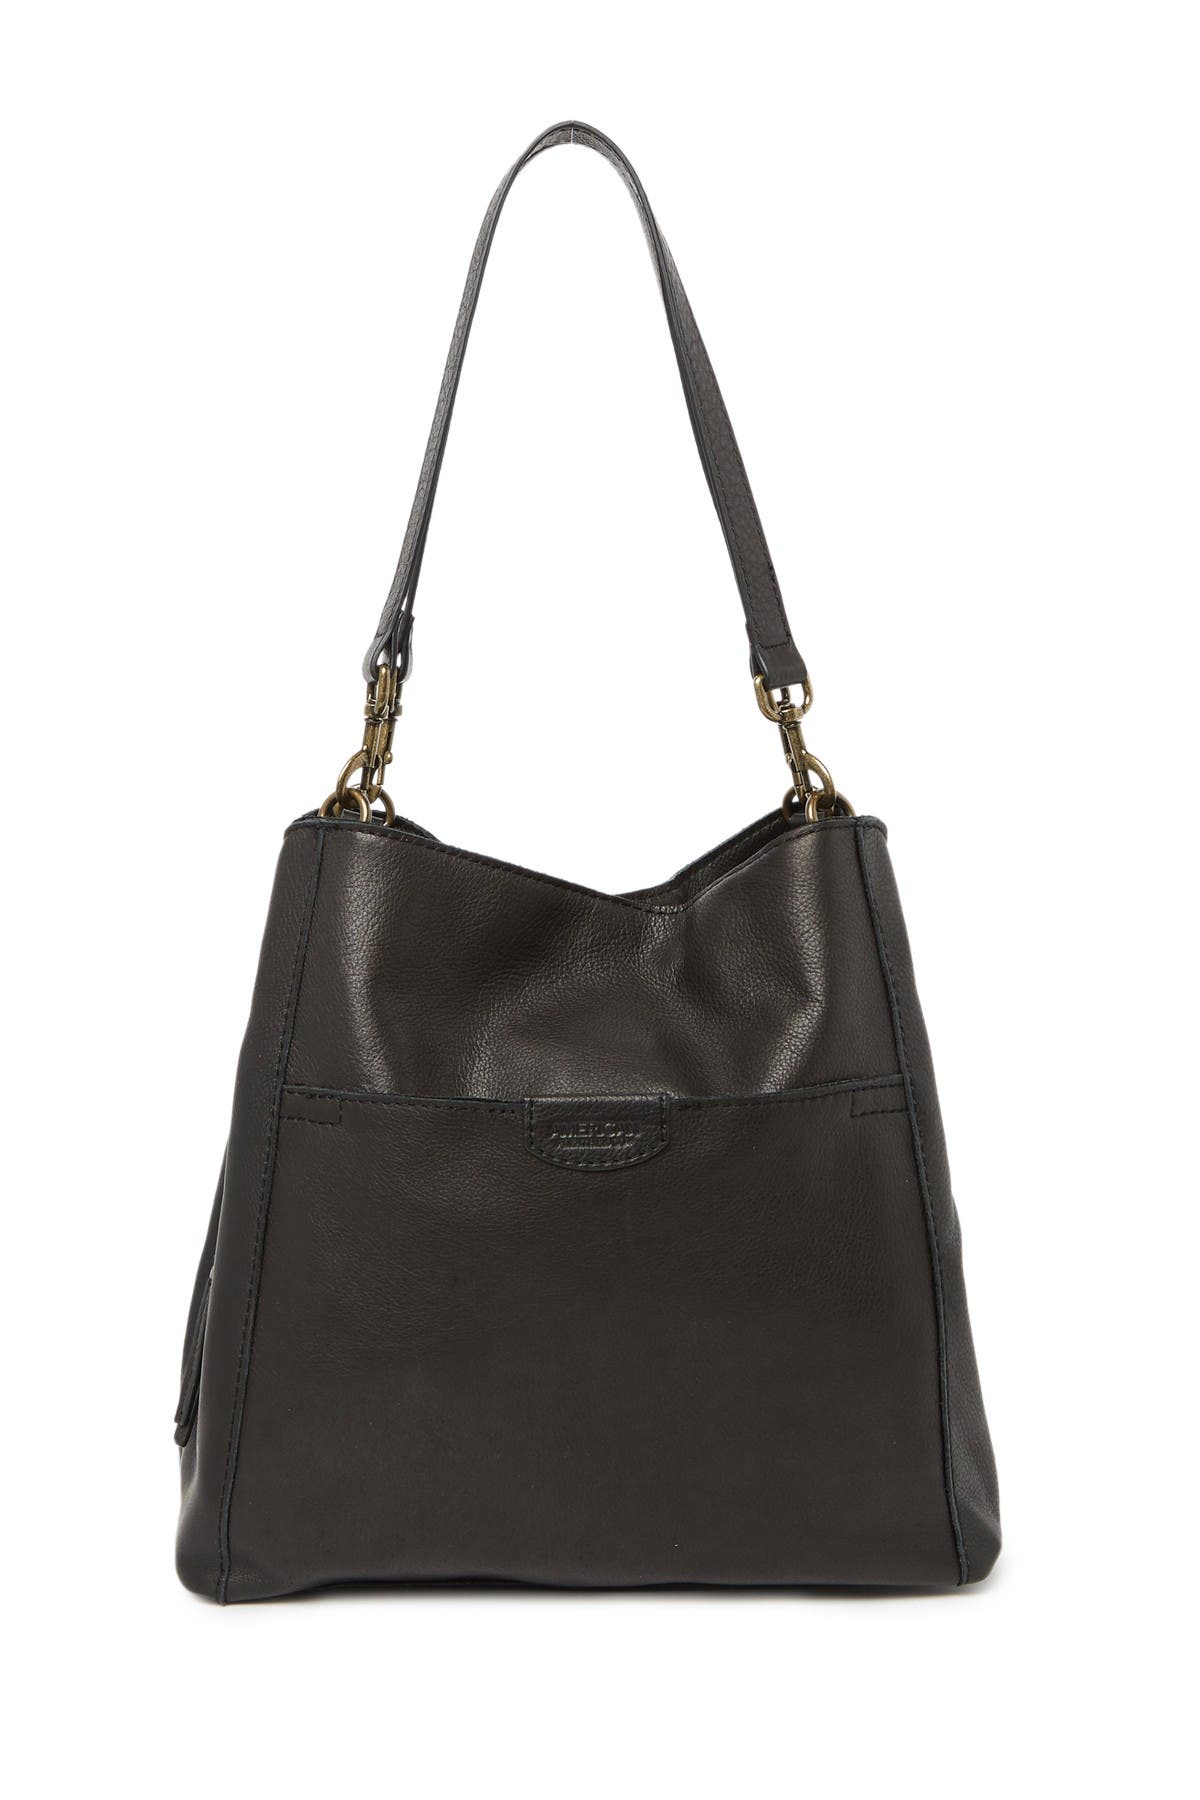 AMERICAN LEATHER CO. | Austin Leather Bucket Bag | Nordstrom Rack